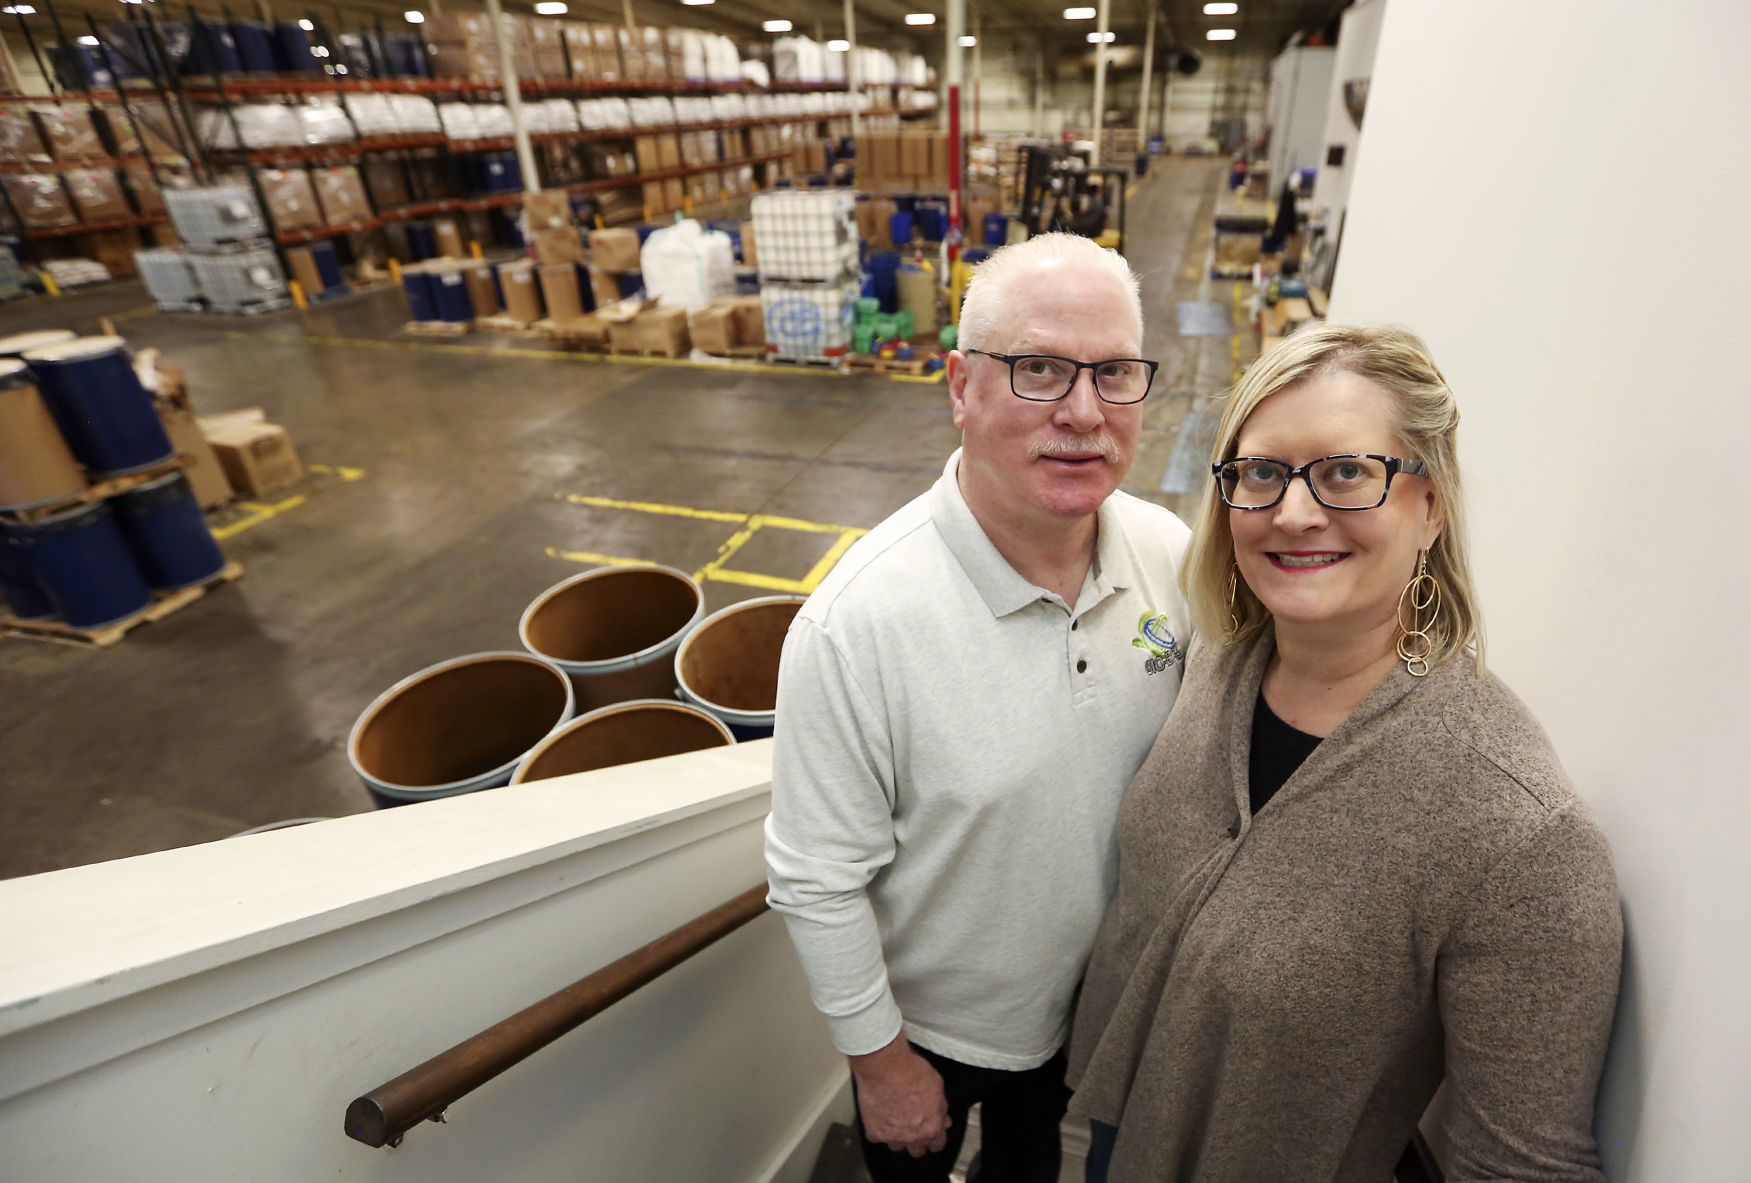 Richard and Kristin Thomas are co-owners of Bio-Bond. They started the business four years ago    PHOTO CREDIT: NICKI KOHL